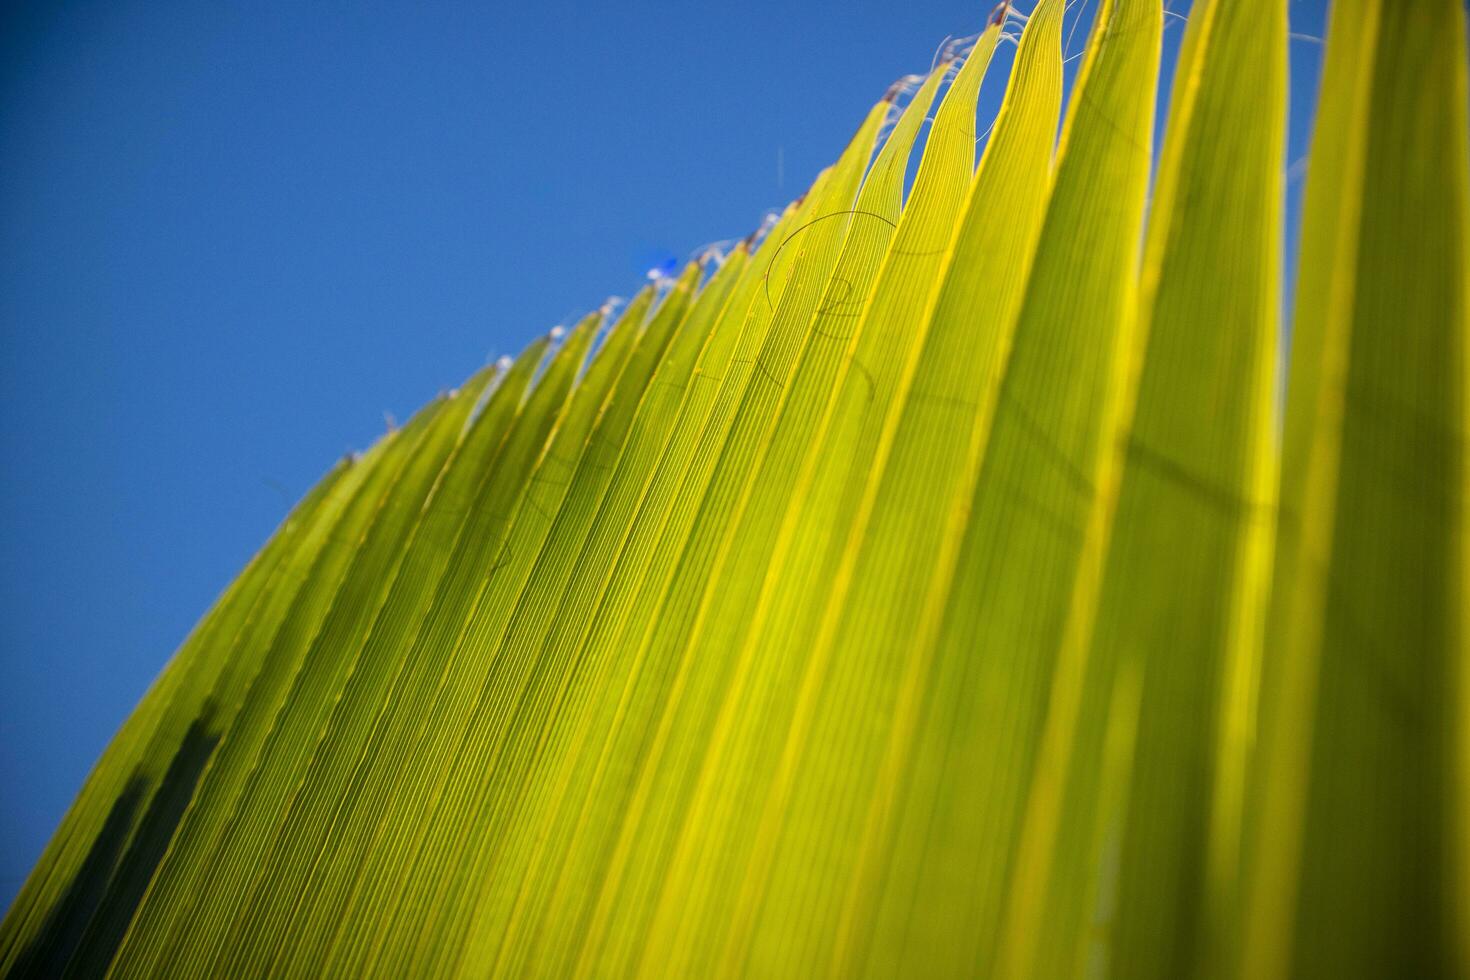 Details of the palm leaf photo